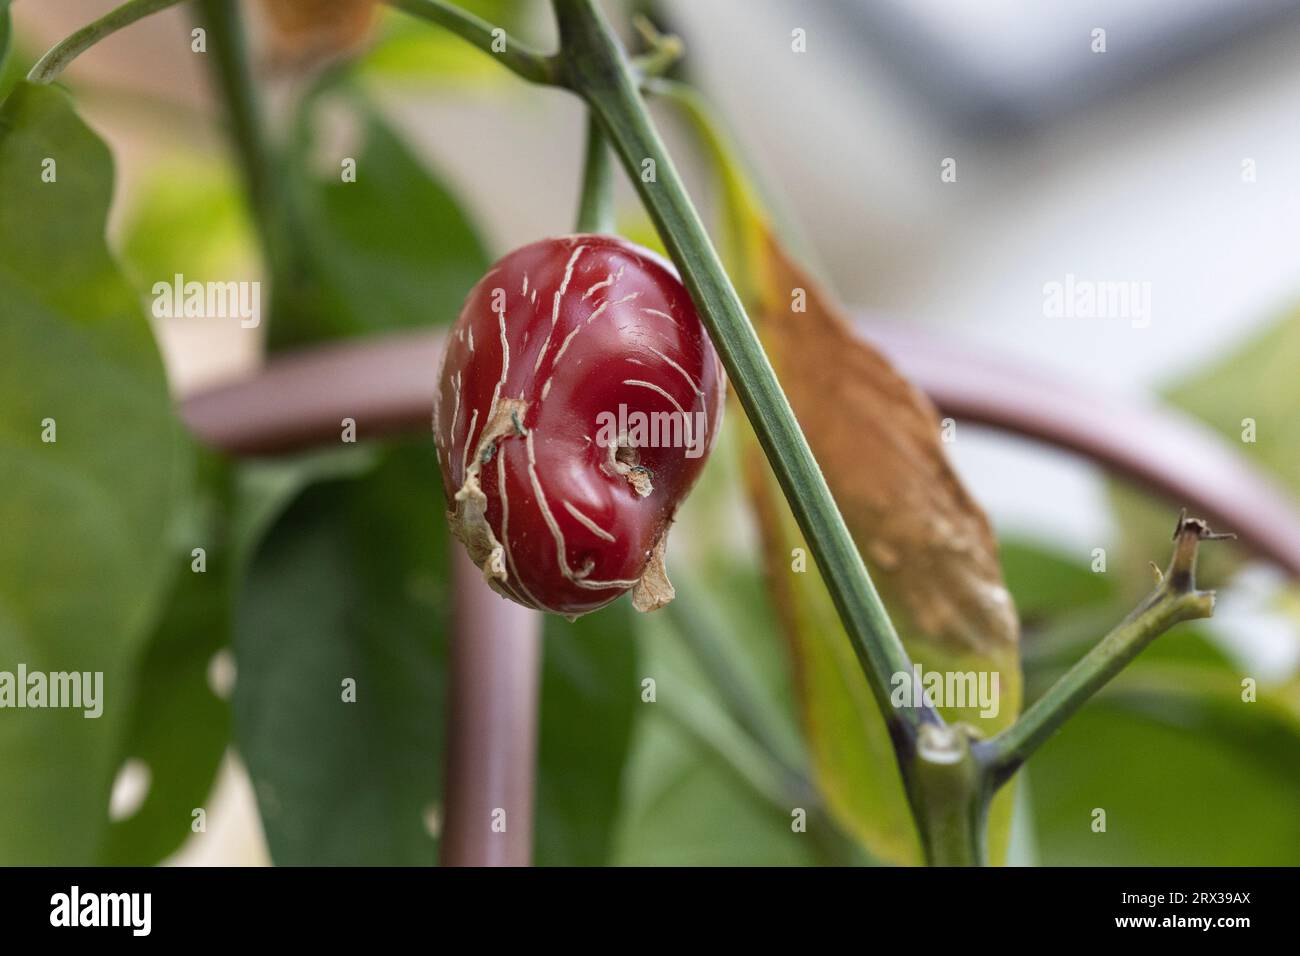 damaged chilli fruit on a homegrown plant Stock Photo